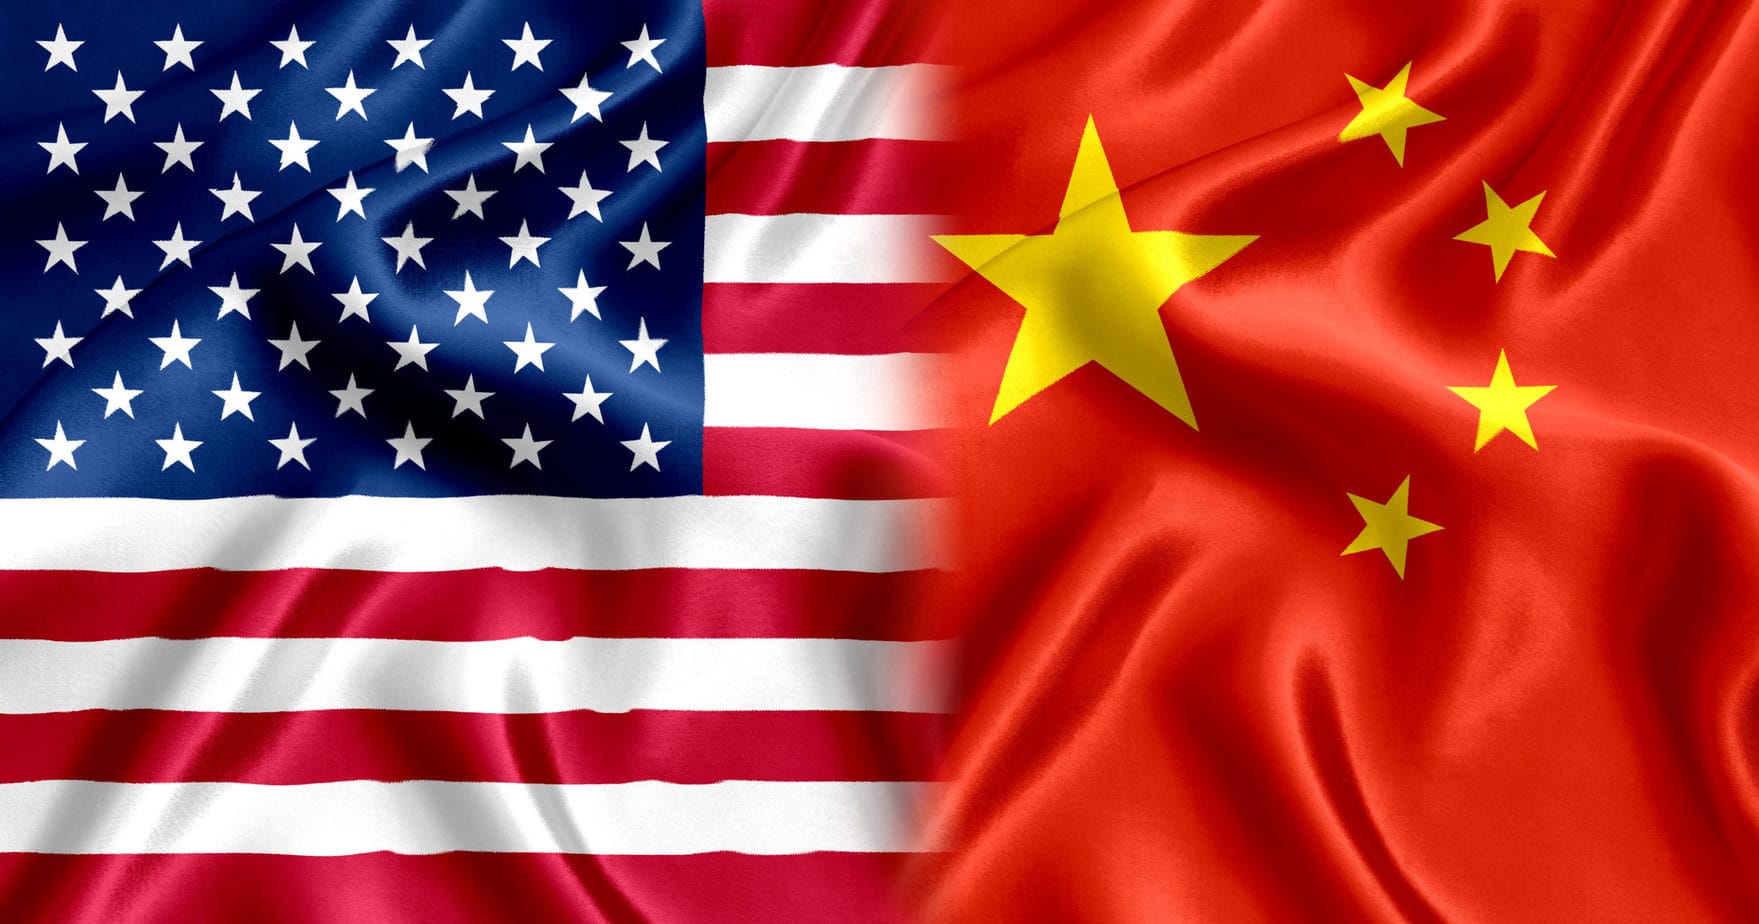 American Exceptionalism vs. the People’s Republic of China